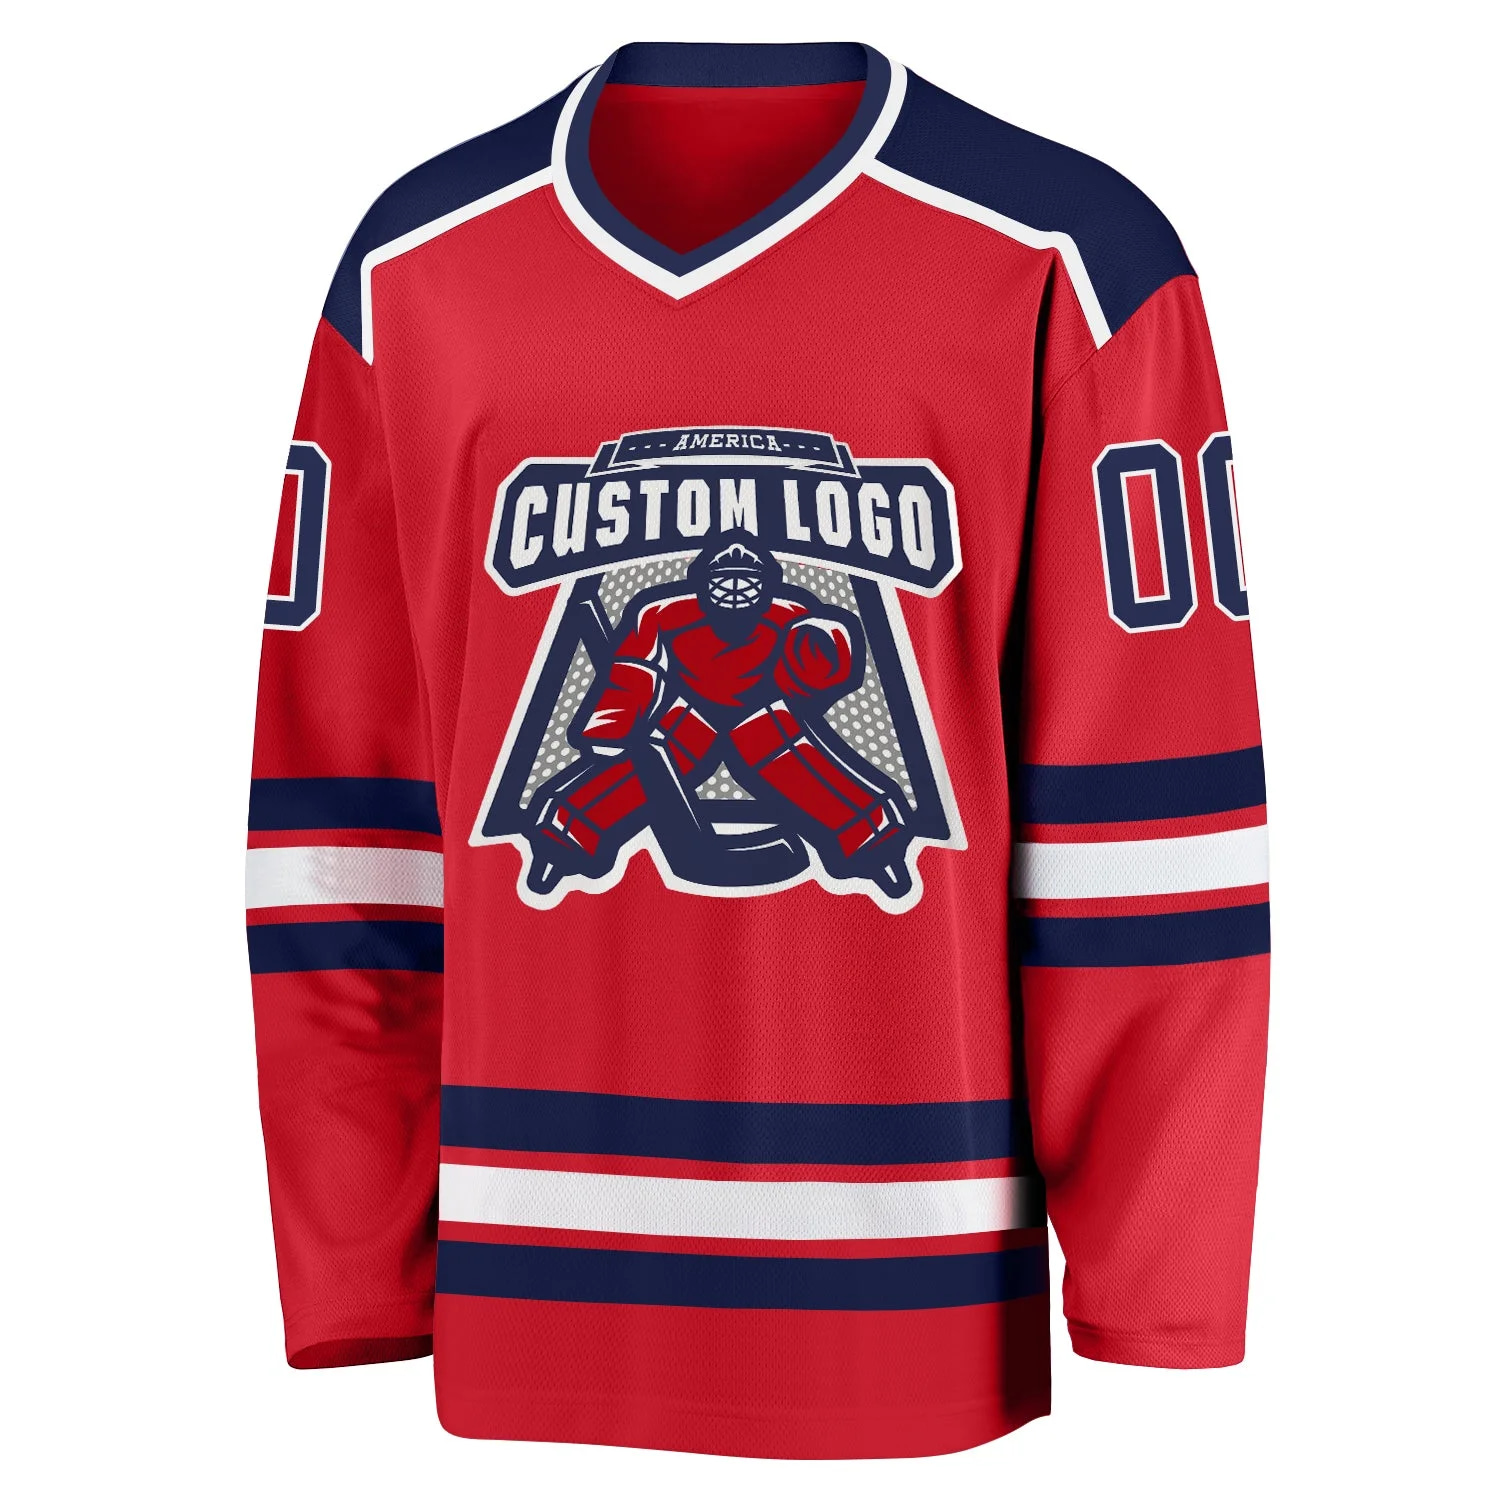 Inktee Store - Stitched And Print Red Navy-White Hockey Jersey Custom Image